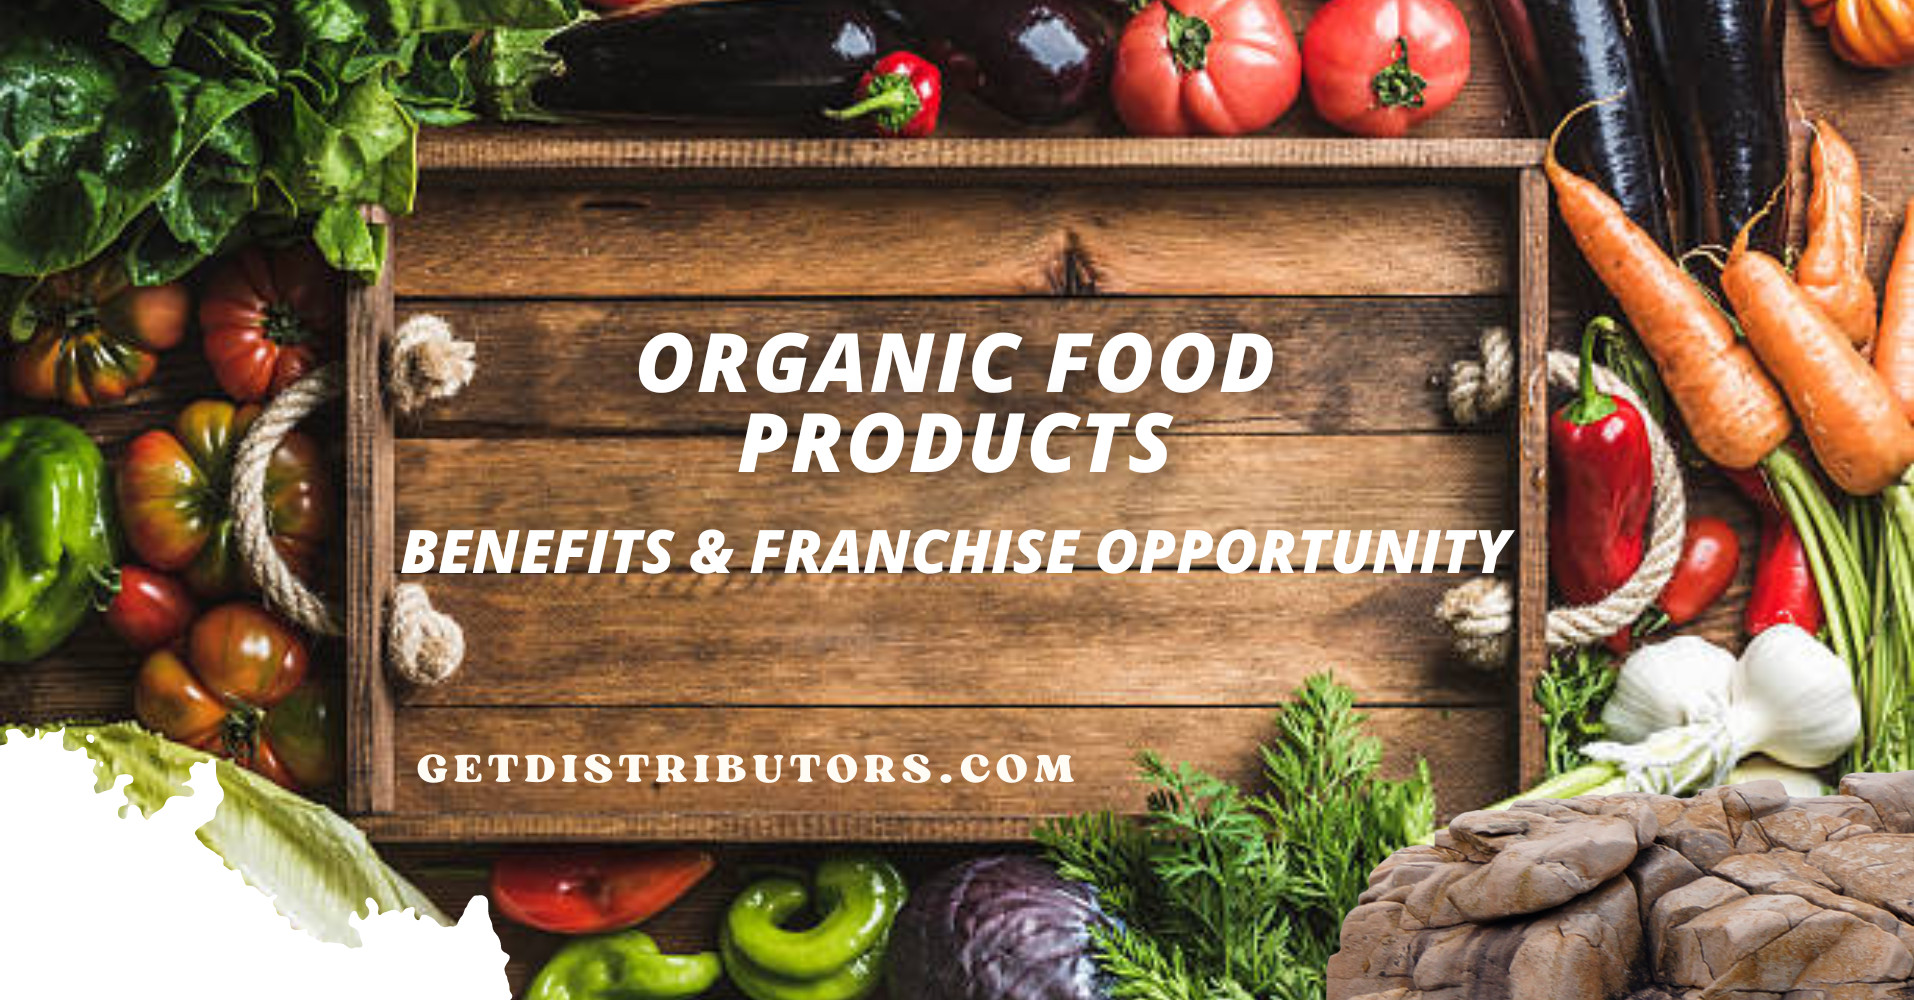 Organic Food Products Benefits & Franchise Opportunity